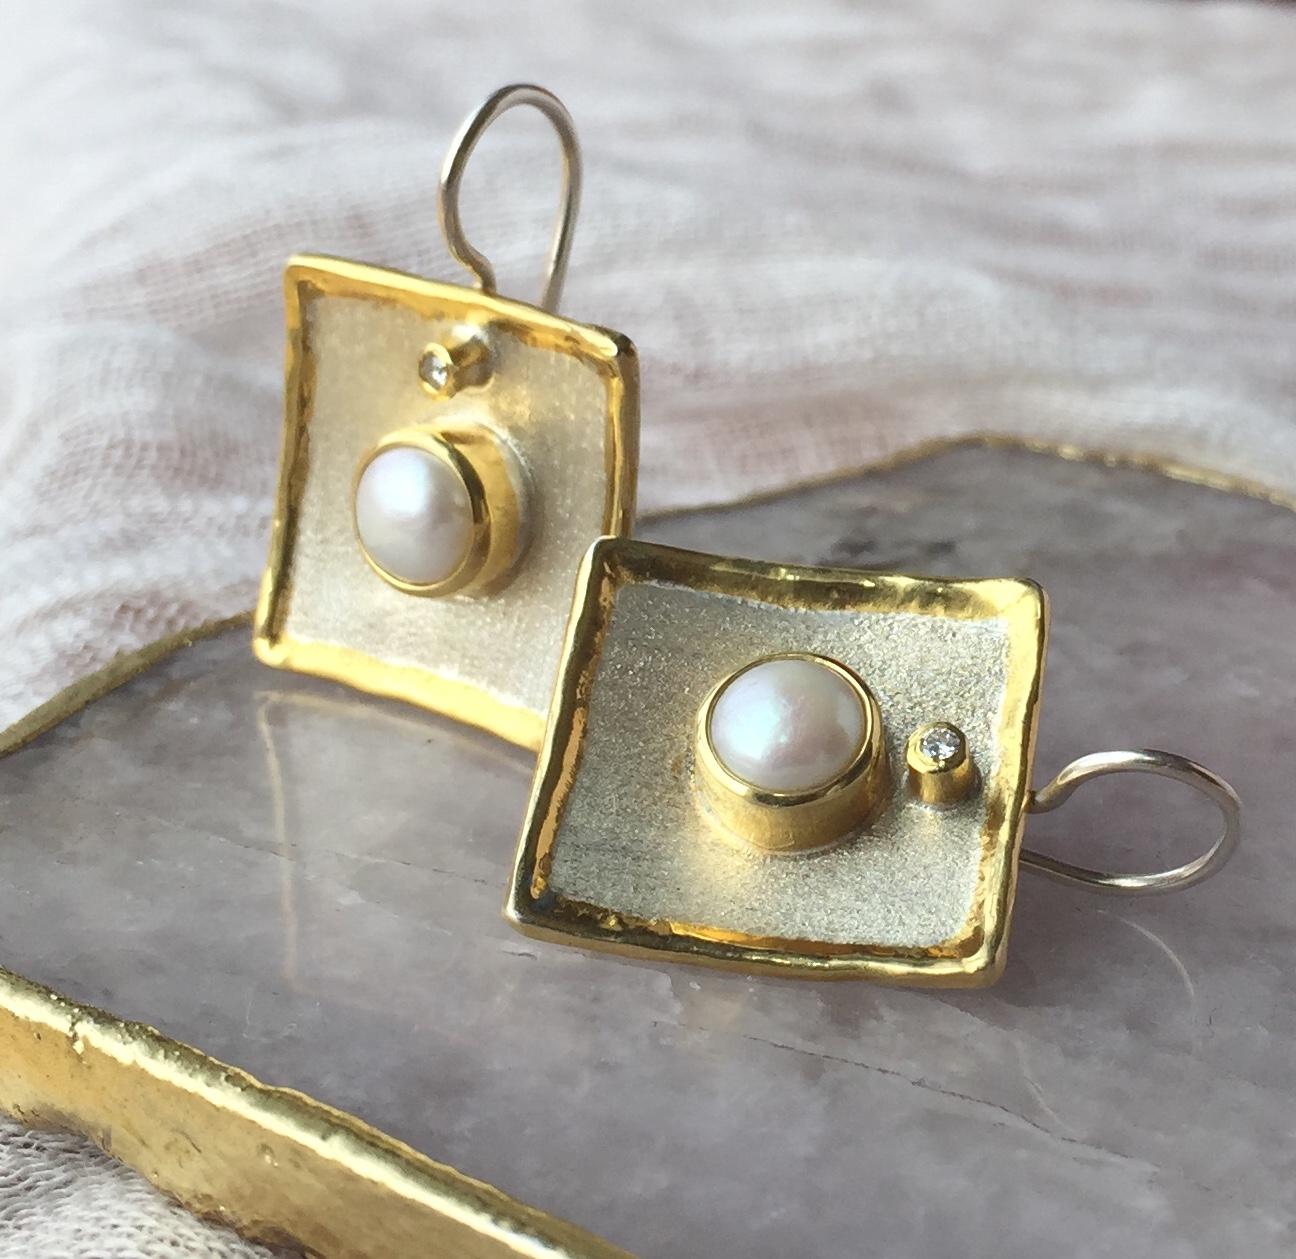 These are Yianni Creations handmade artisan earrings from Midas Collection crafted in Greece from fine silver 950 purity and plated with palladium to resist the elements. These square-shaped dangle earrings feature 7MM freshwater pearl accompanied